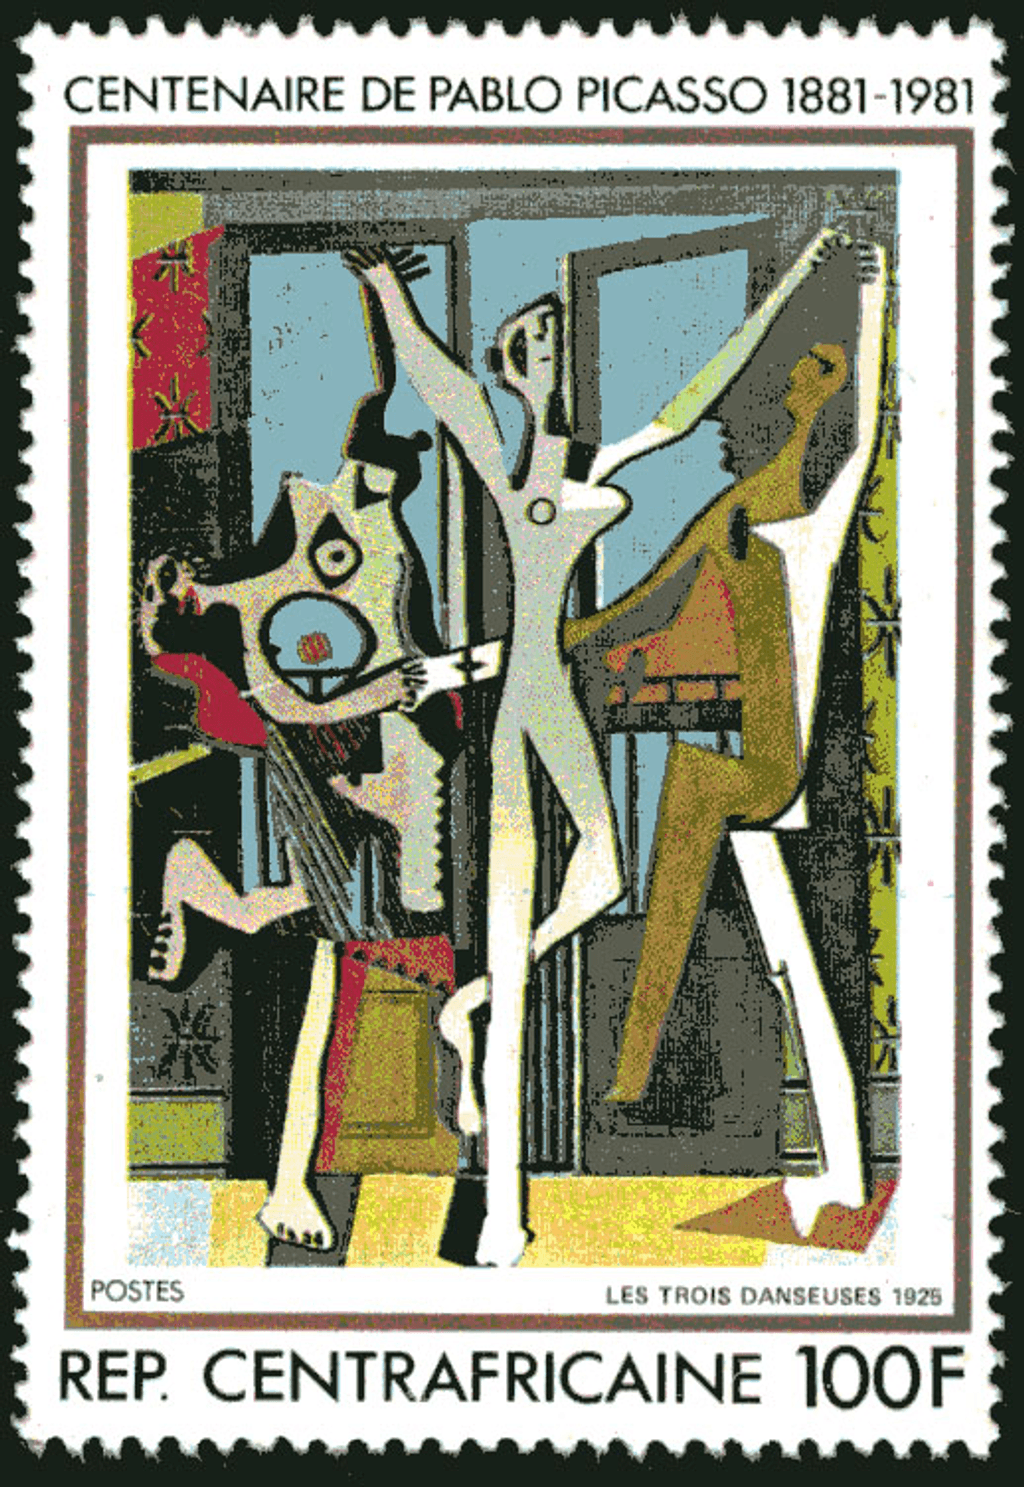 Pablo Picasso paintings